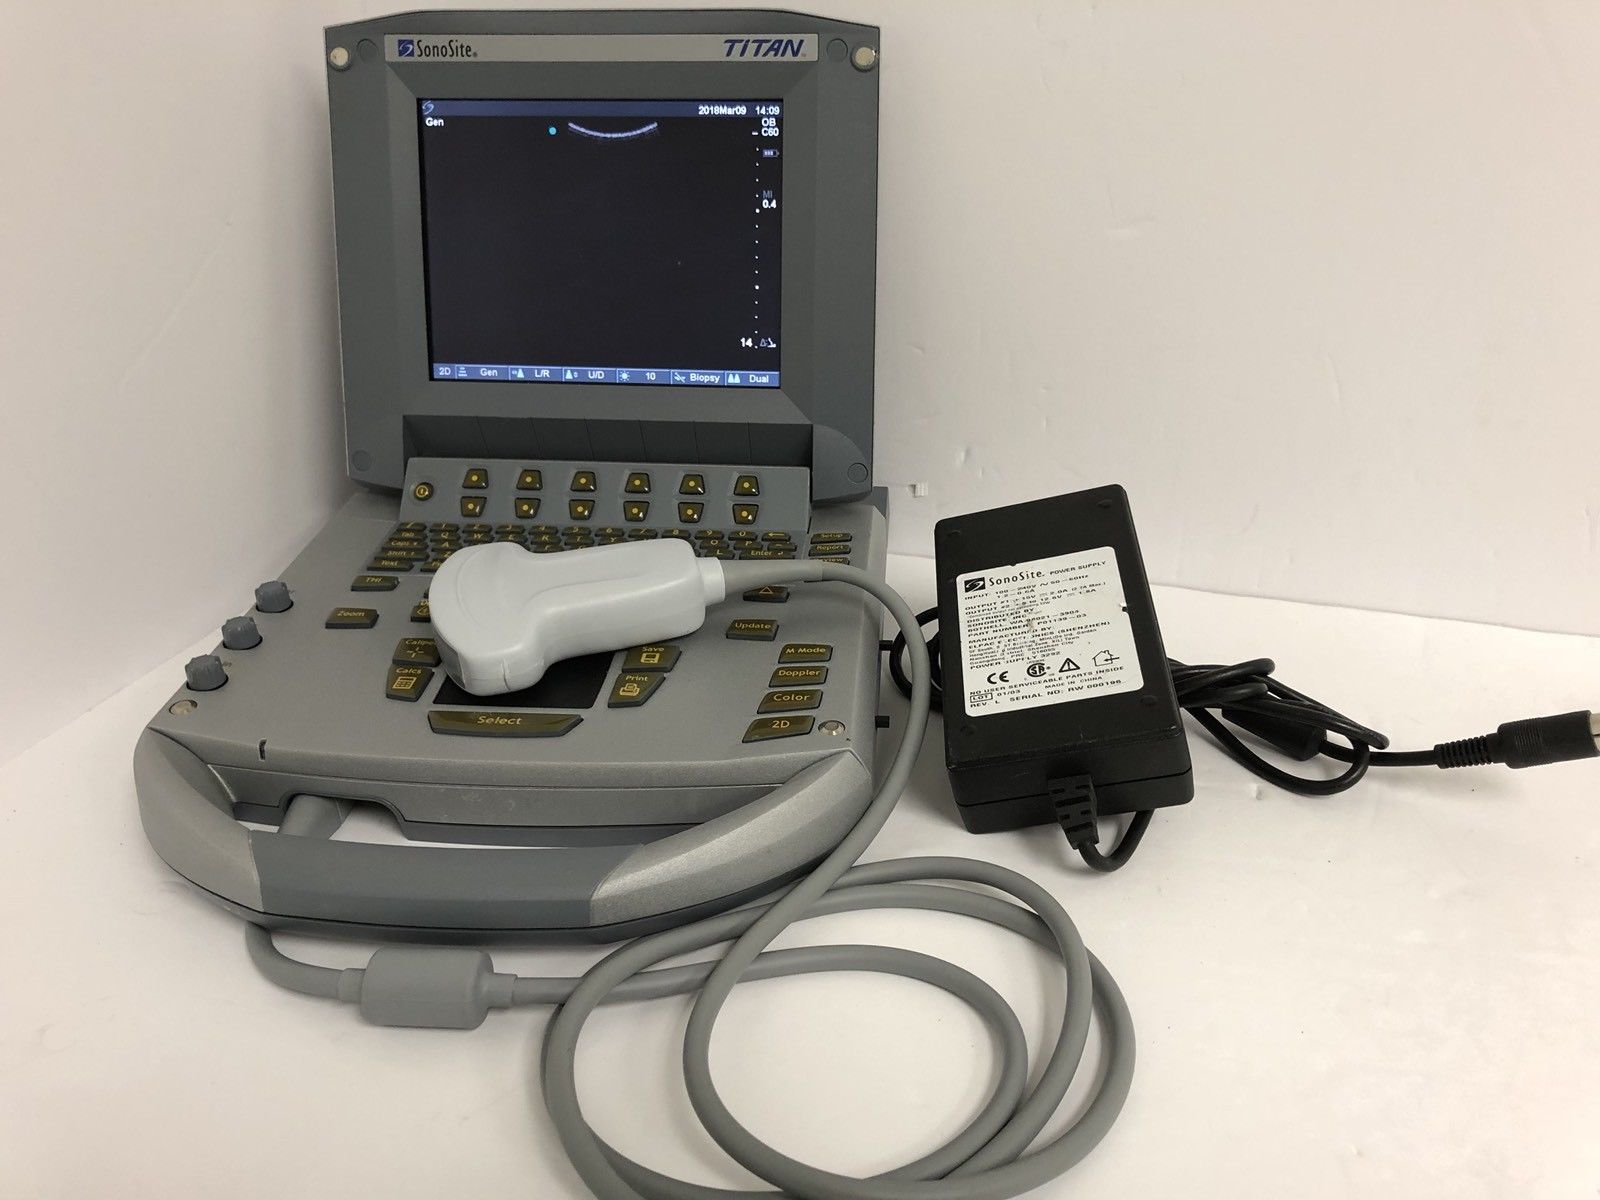 SONOSITE TITAN Ultrasound With C60/5-2 Convex Array Probe And Power Supply DIAGNOSTIC ULTRASOUND MACHINES FOR SALE